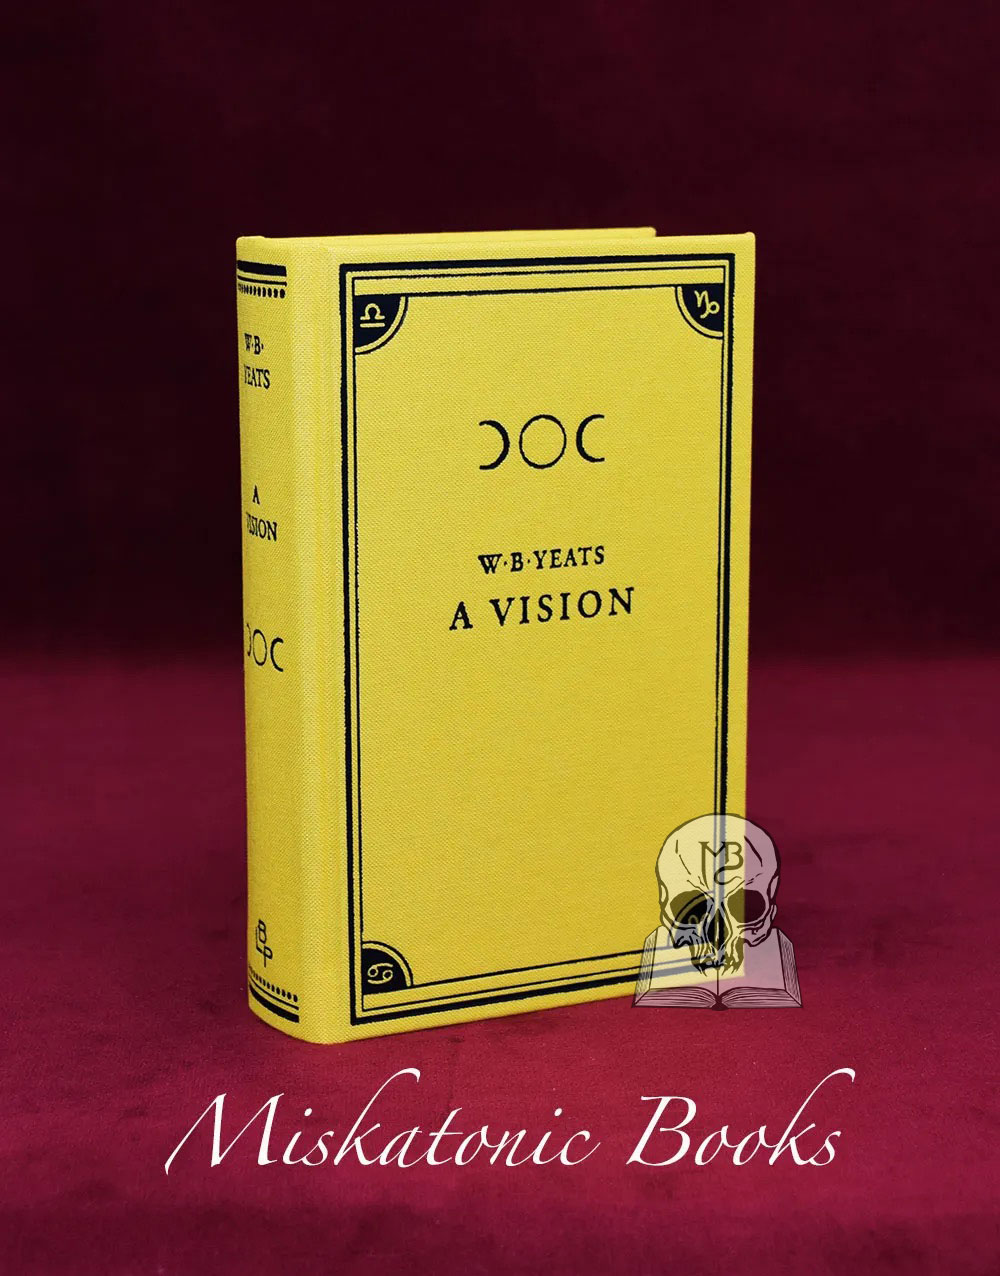 A VISION by W.B. Yeats - Limited Edition Hardcover